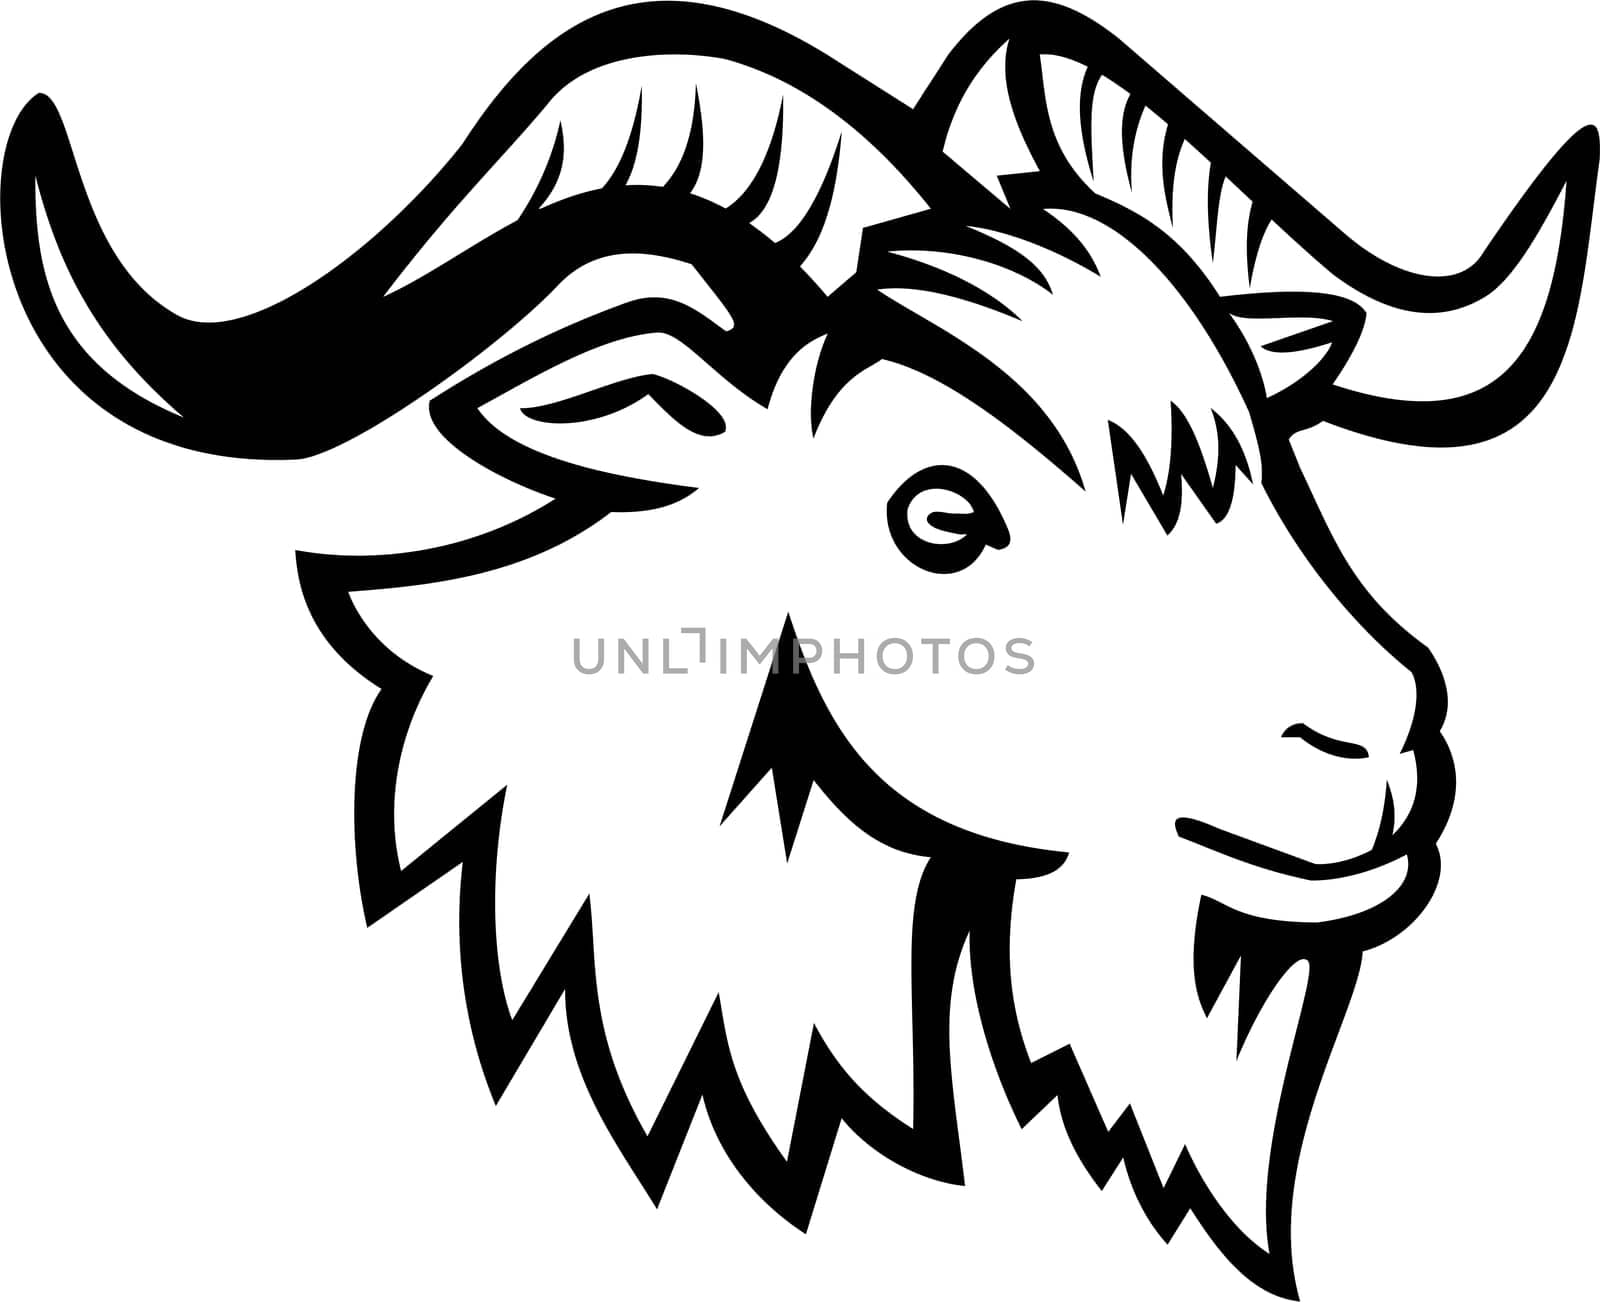 Mascot illustration of head of Juan Fernandez wild goat viewed from the side 
on isolated background in retro style.